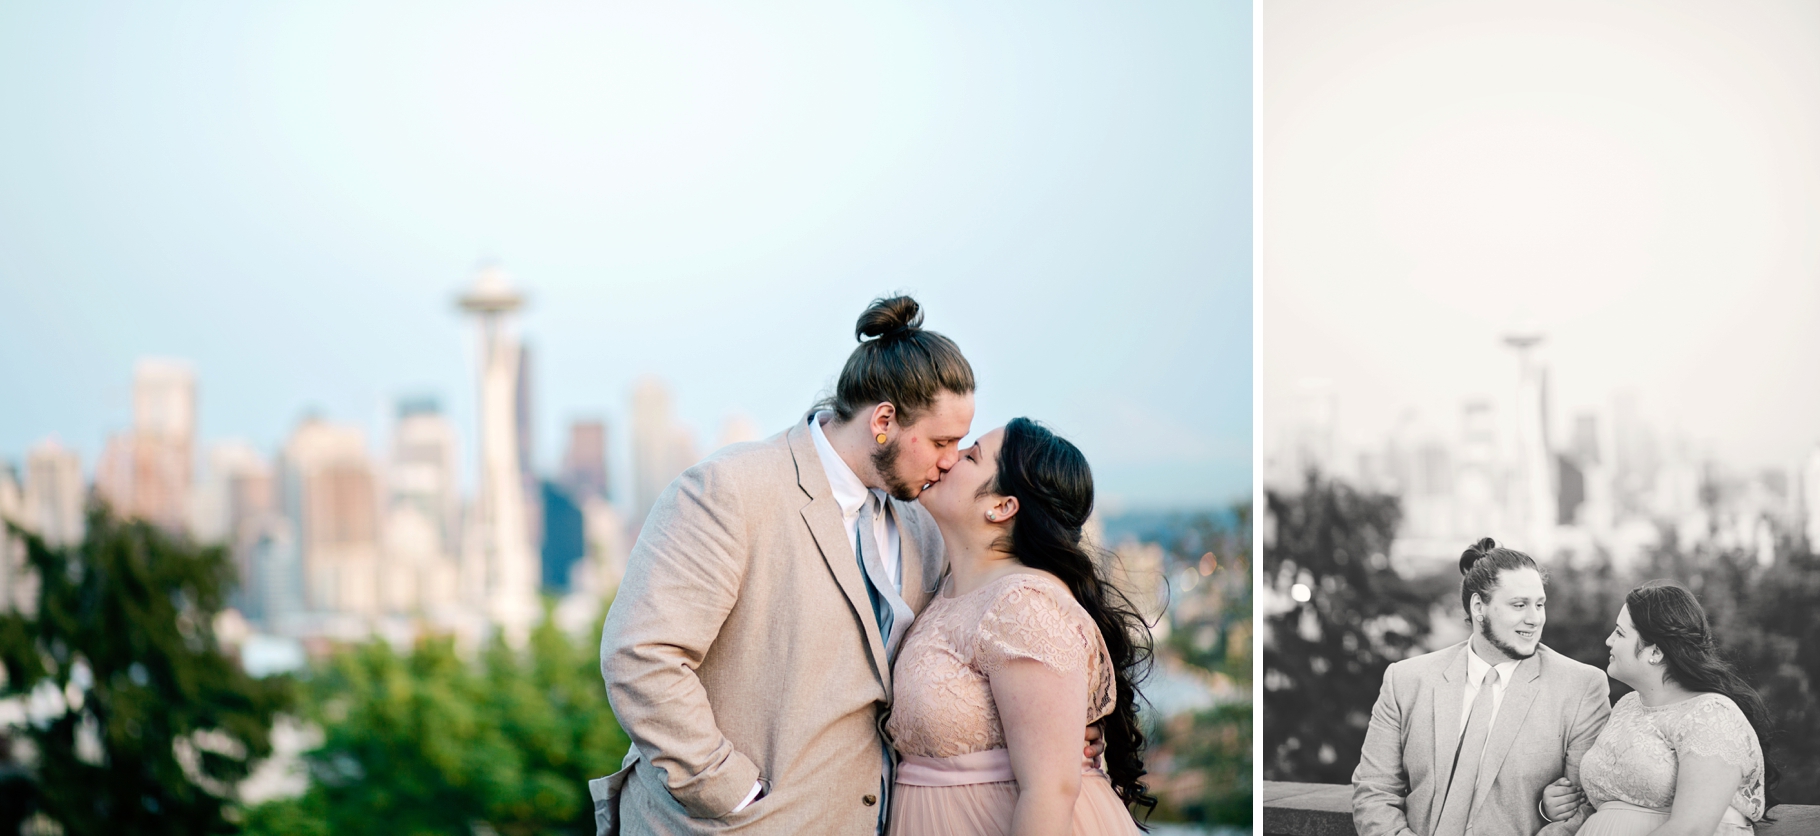 32-Bride-Groom-Elopement-Kerry-Park-Picturesque-Cityscape-Space-Needle-Seattle-Photographer-Wedding-Photography-by-Betty-Elaine-Blush-BHLDN-Wedding-Gown-Dress